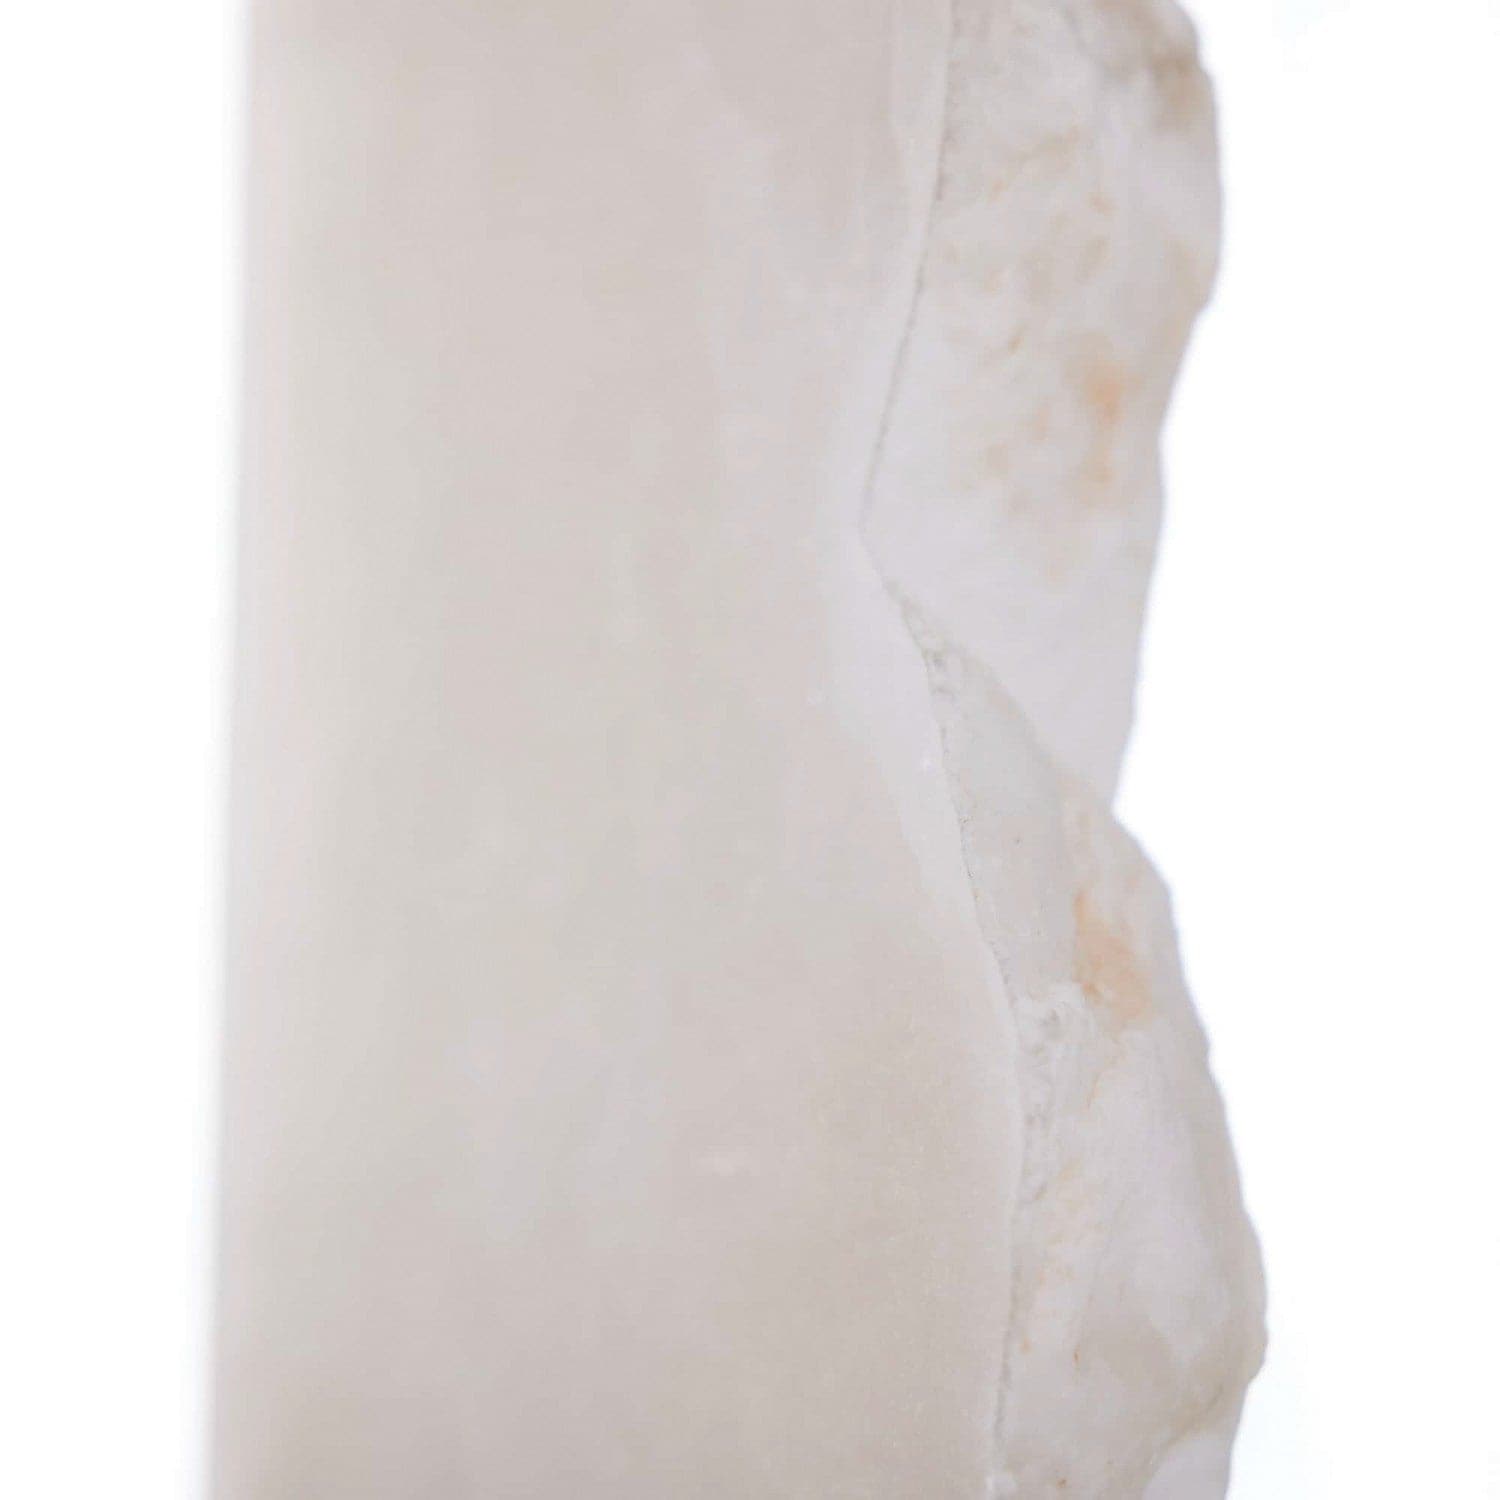 Sculpture from the Taos collection in White finish